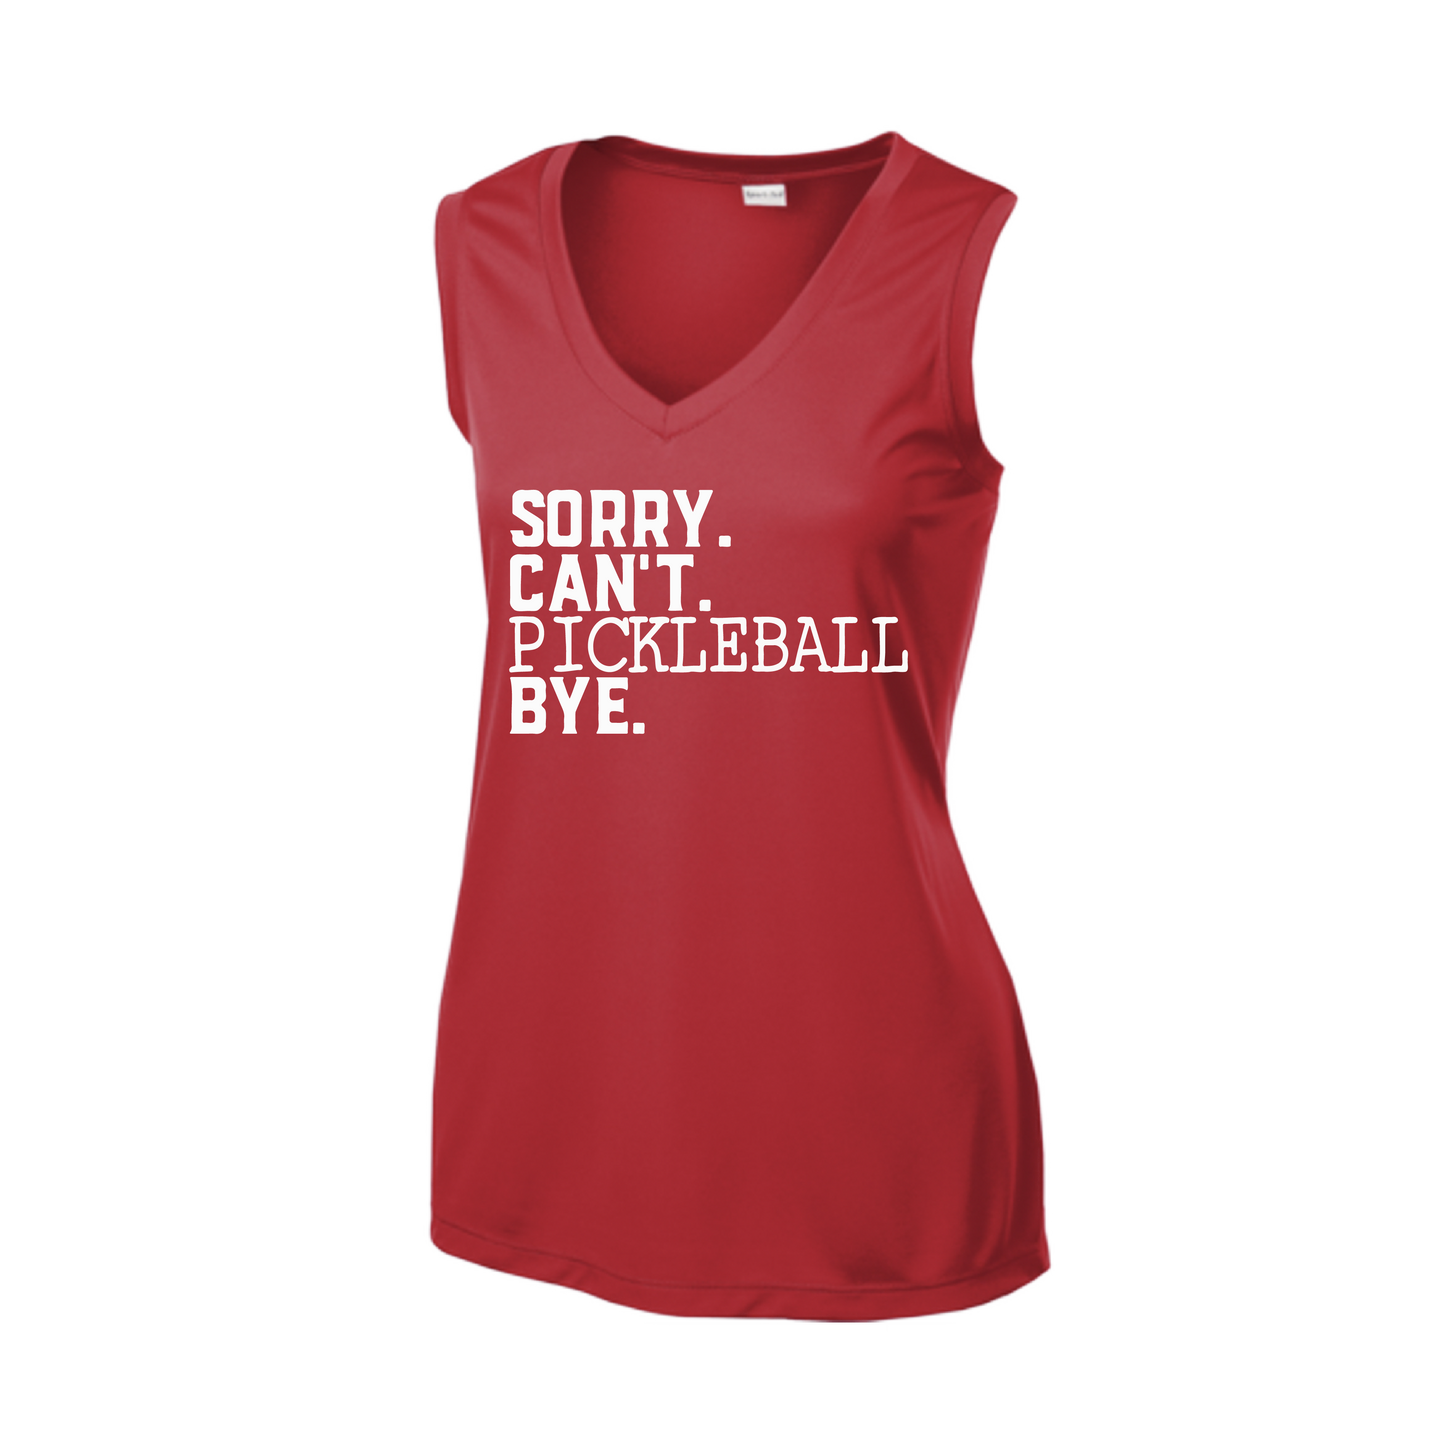 Sorry Can't Pickleball Bye | Women’s Sleeveless Athletic Shirt | 100% Polyester